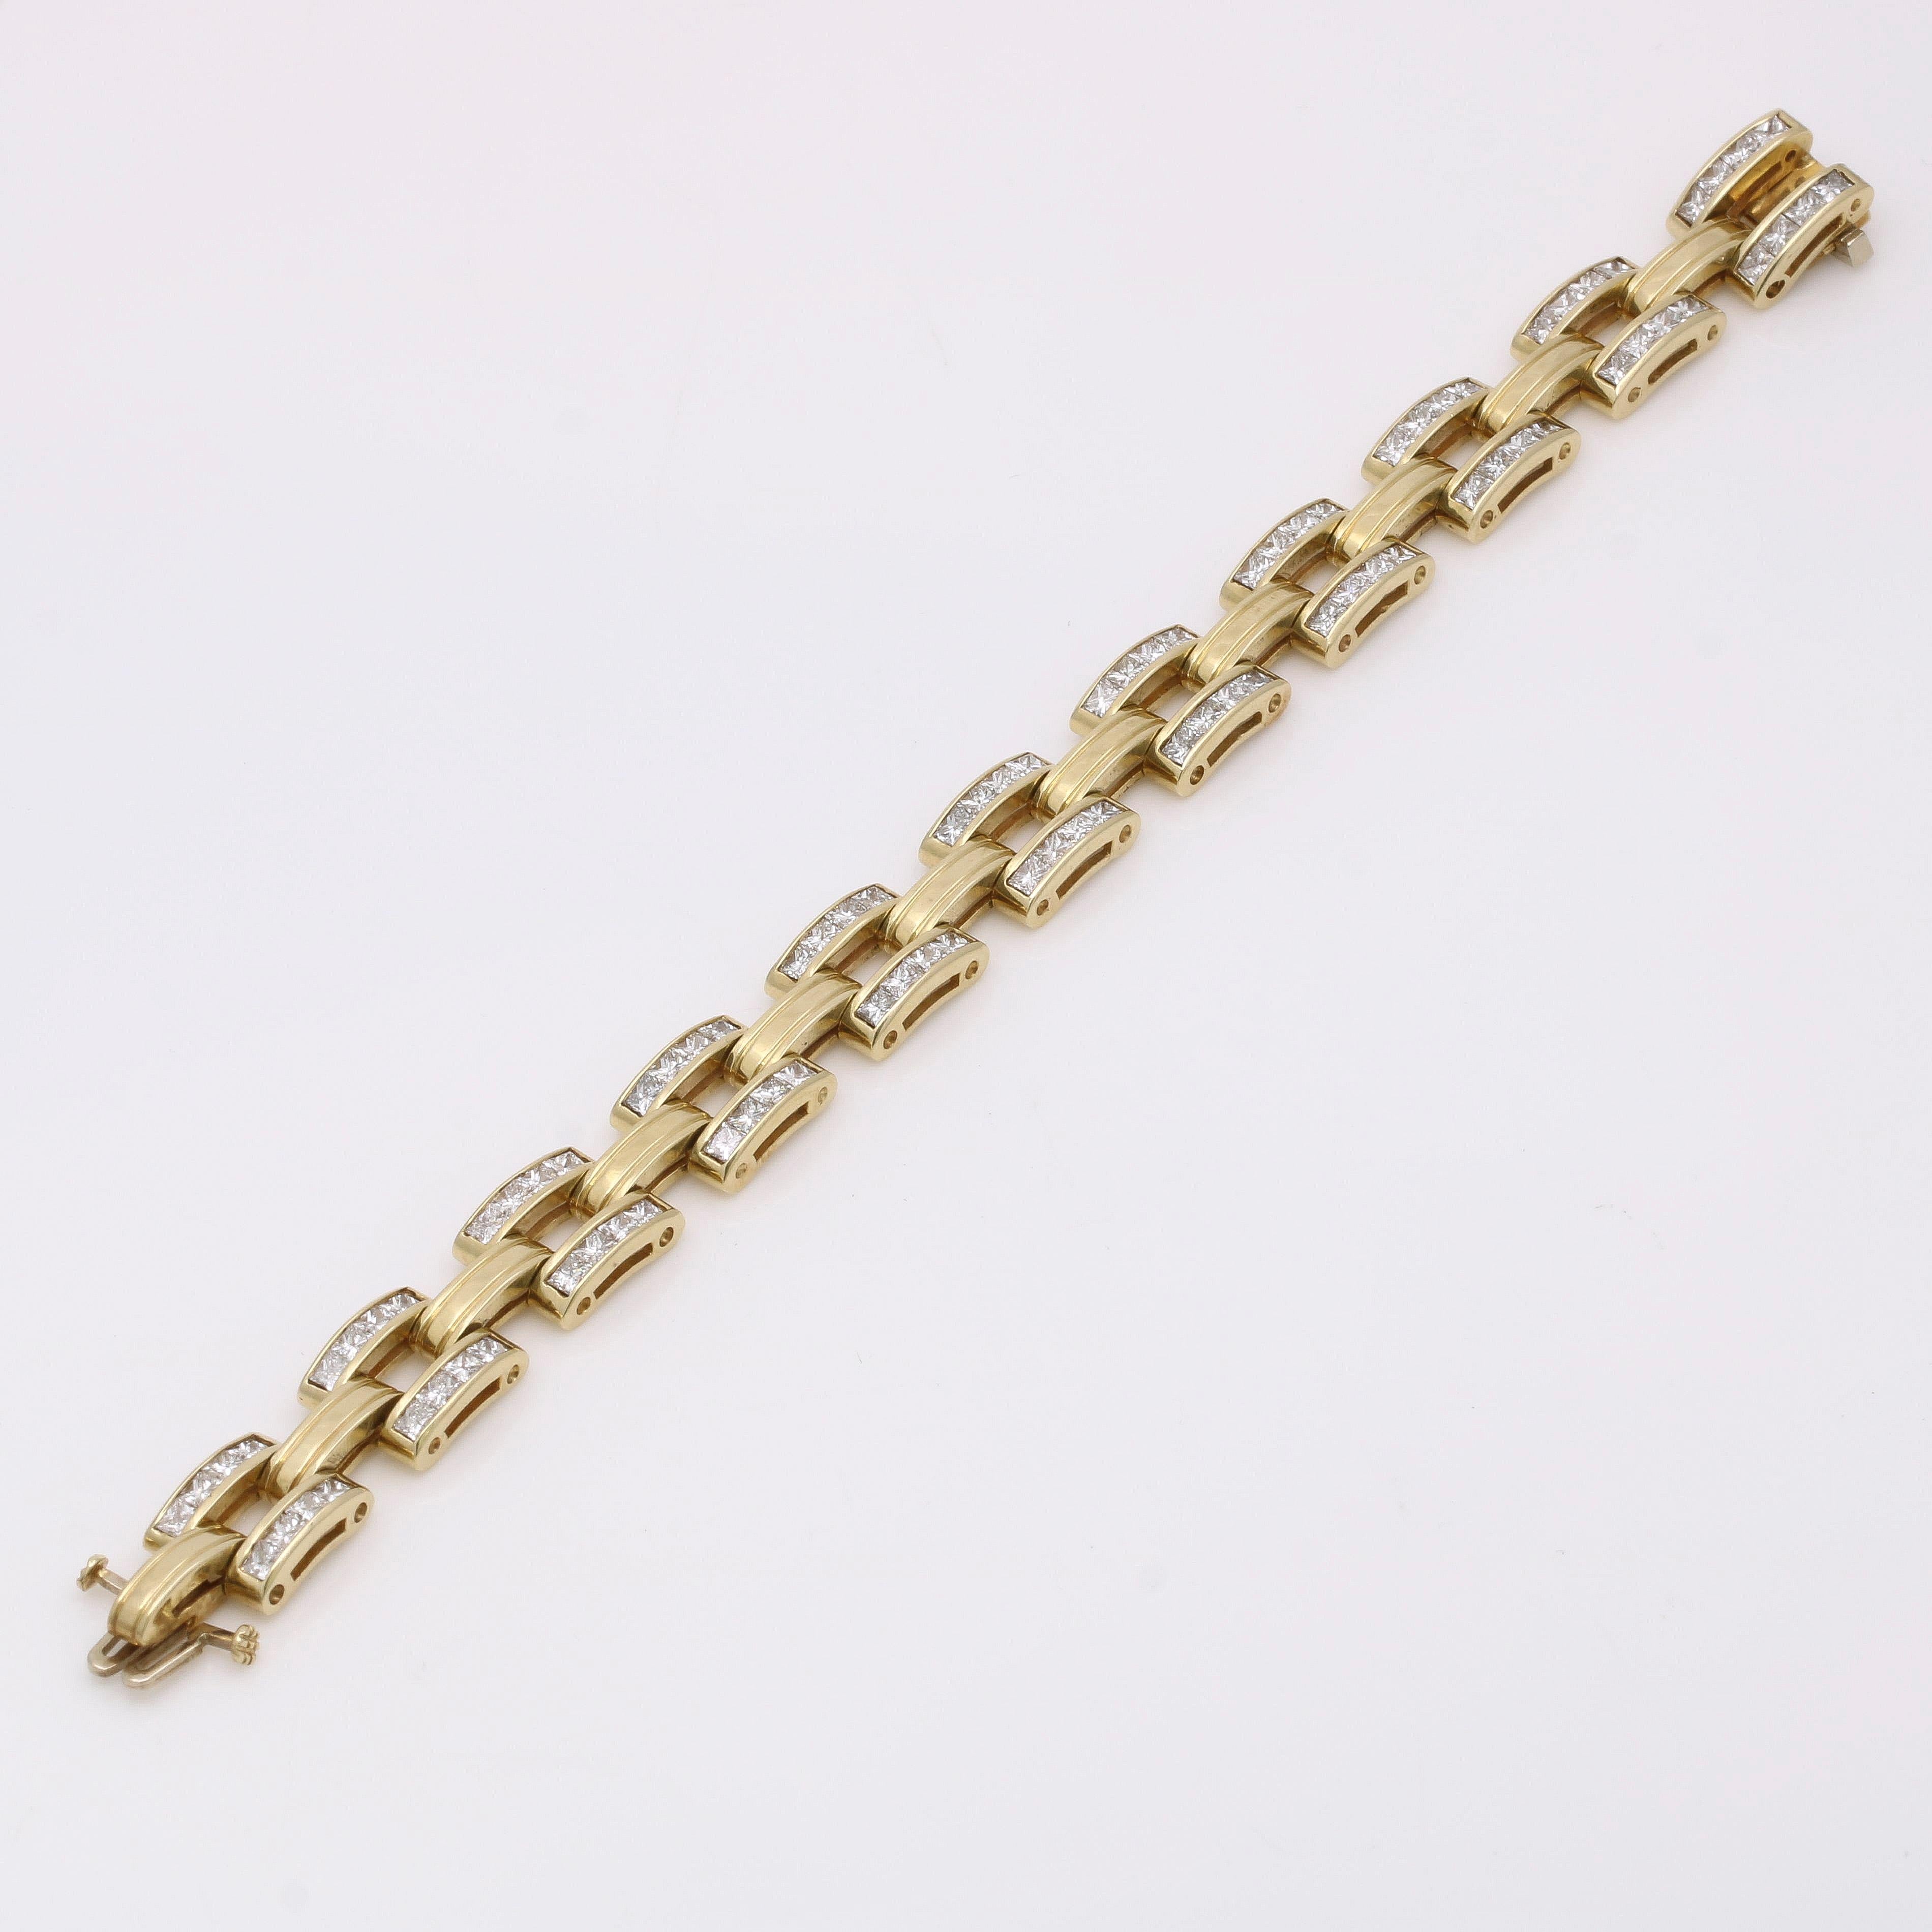 This bracelet is the perfect cocktail of modern and vintage glamor, with its bezel-set princess-cut diamonds and a seamless slide clasp. The rectangular links showcase all that glitters, setting off your smile with a brilliant display of sparkle. It